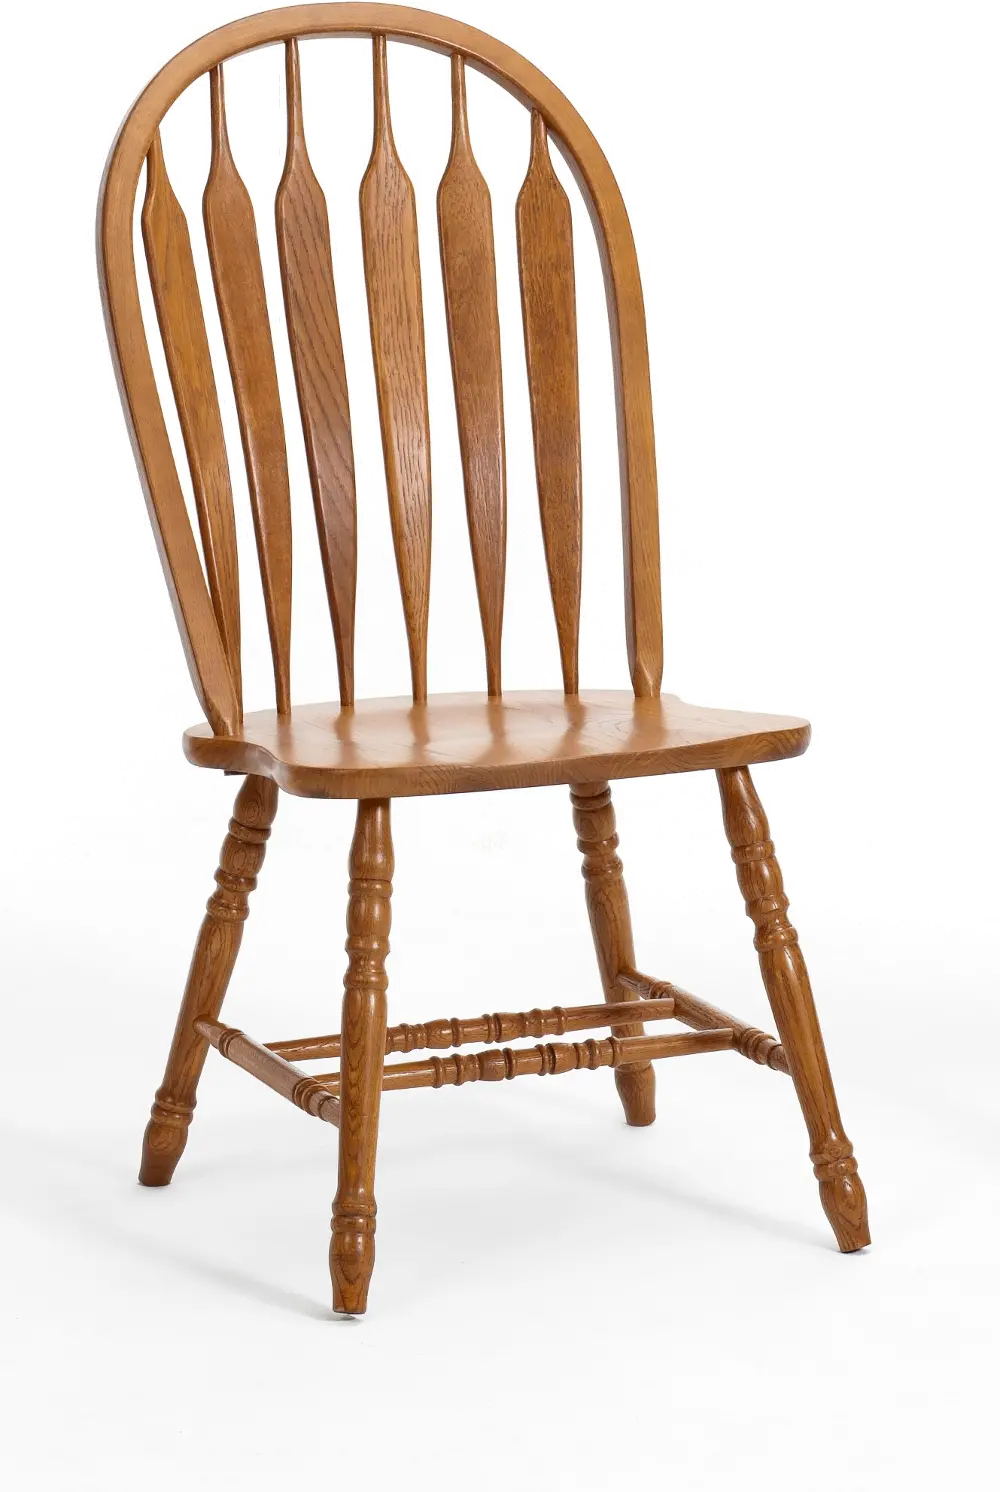 Country Oak Dining Room Chair with Turned Legs - Classic Chestnut-1